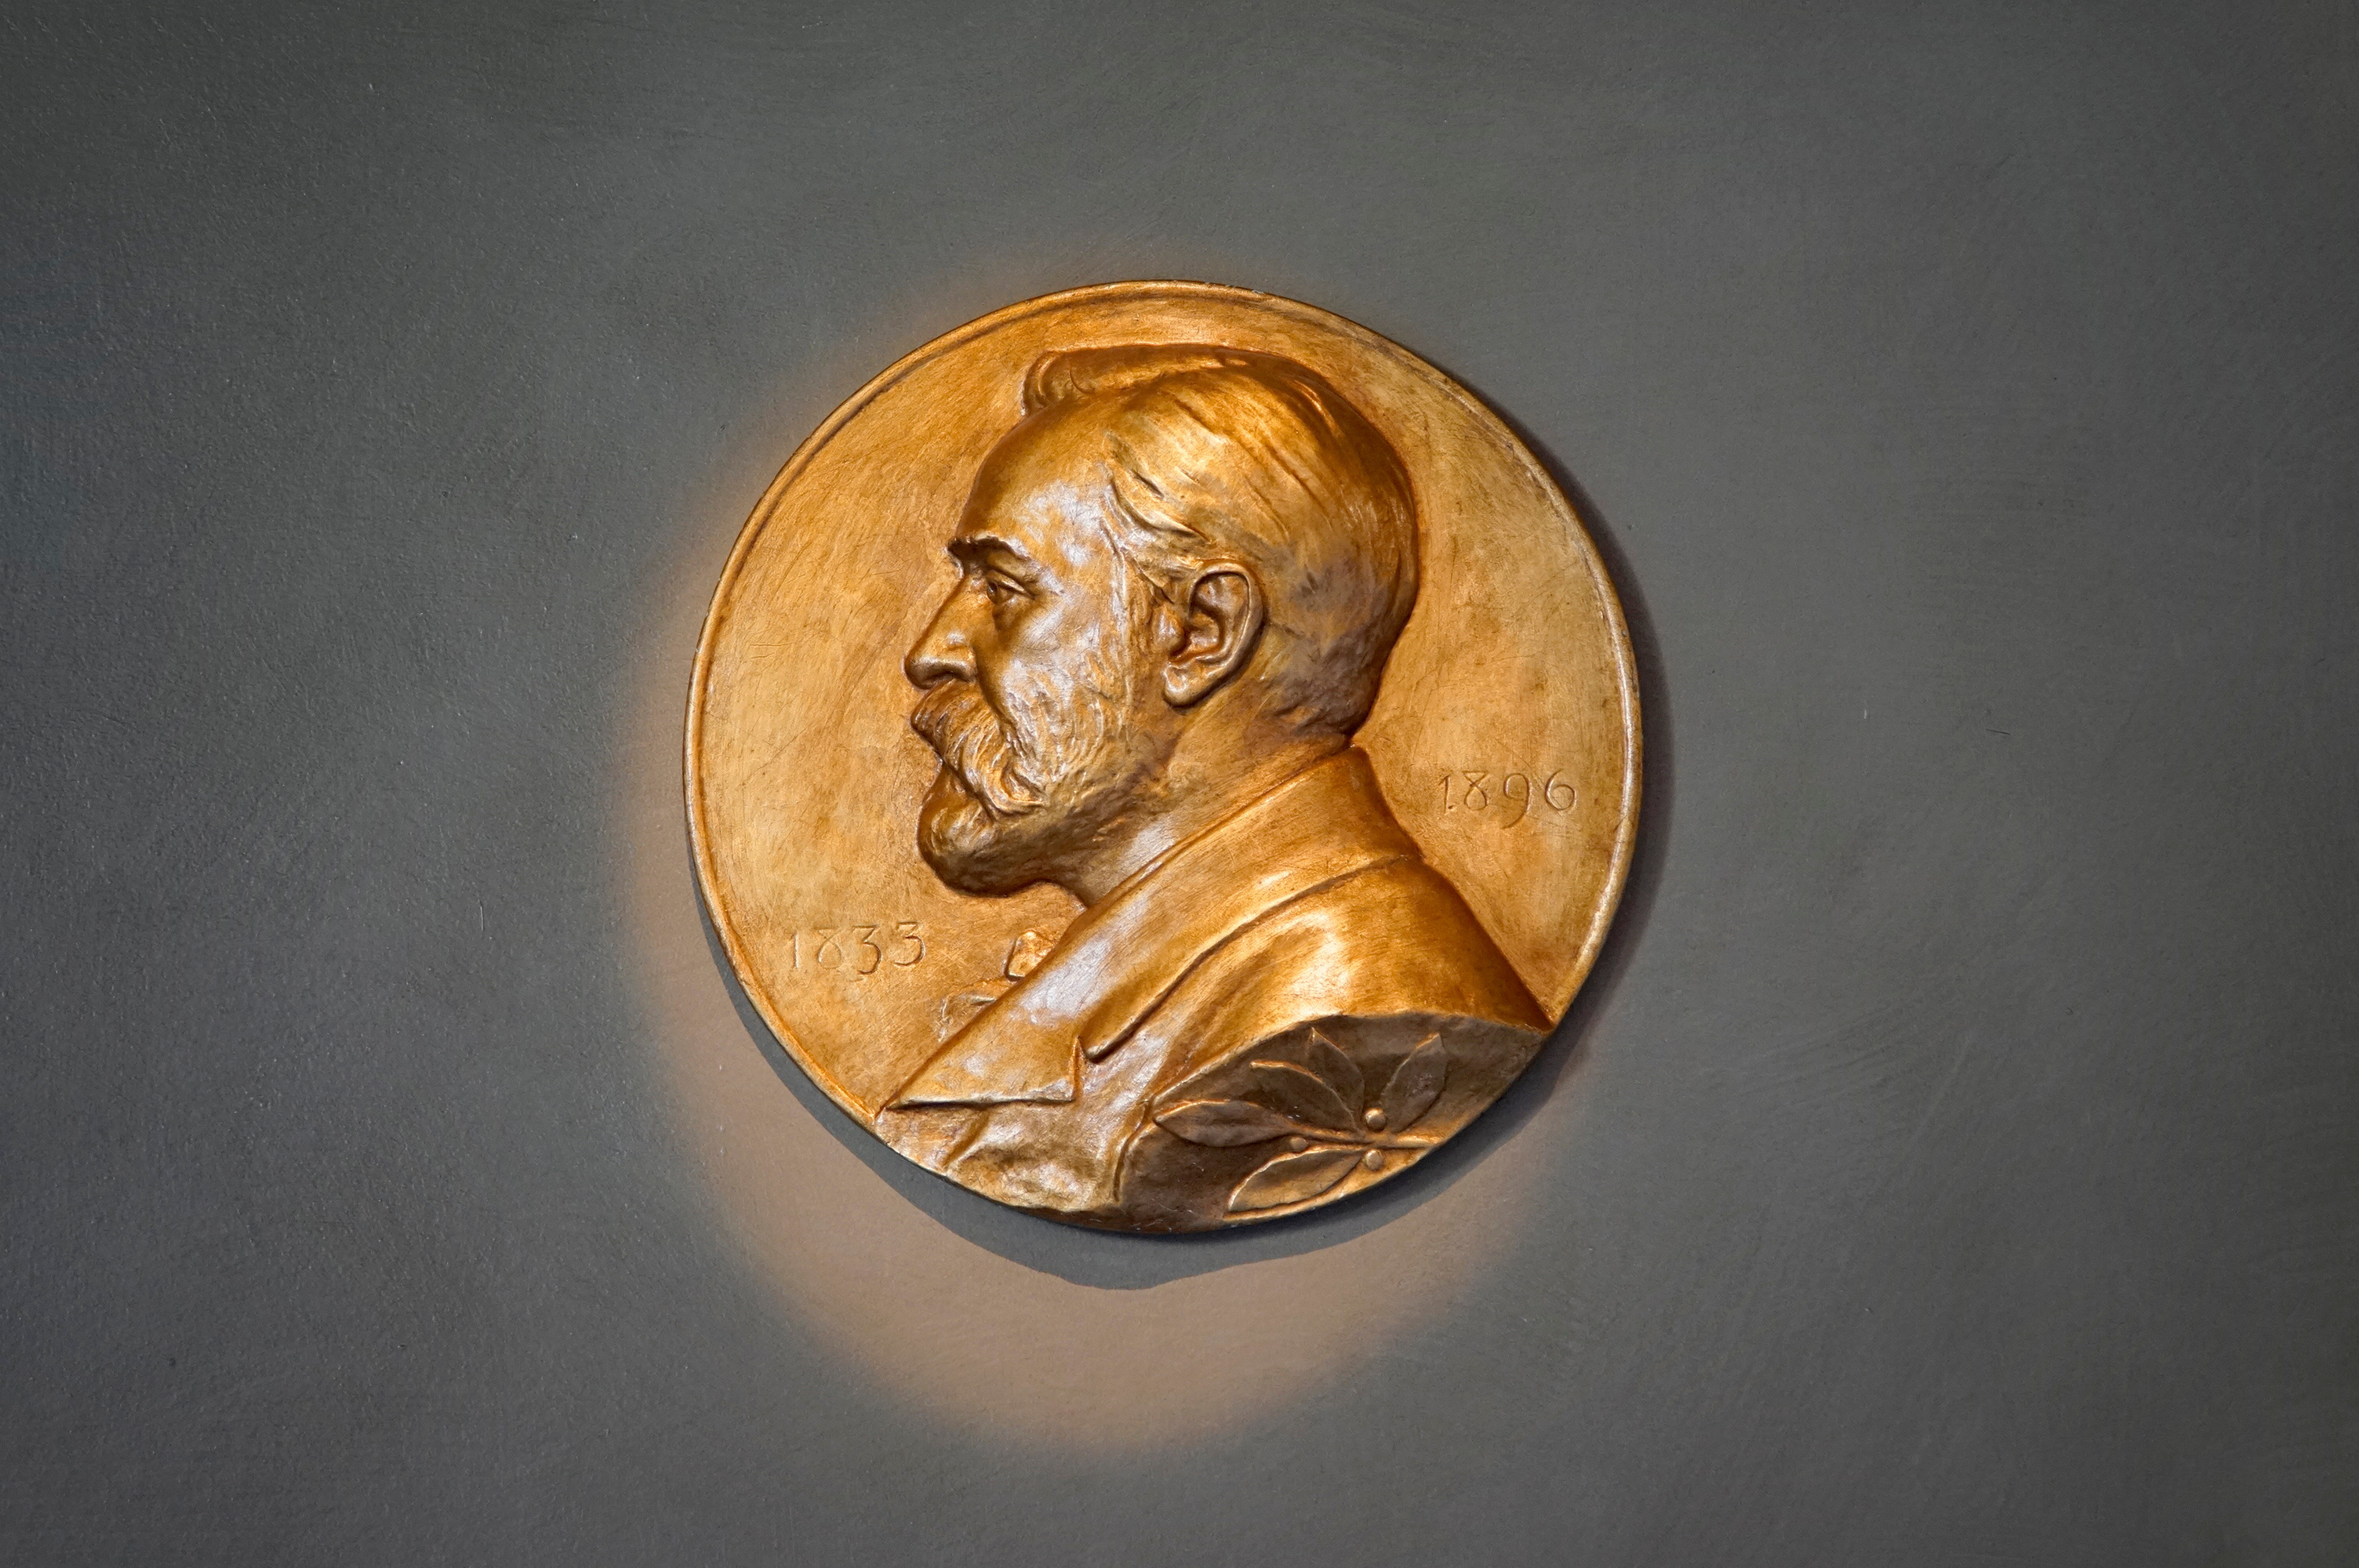 A Nobel medallion over a gray background.